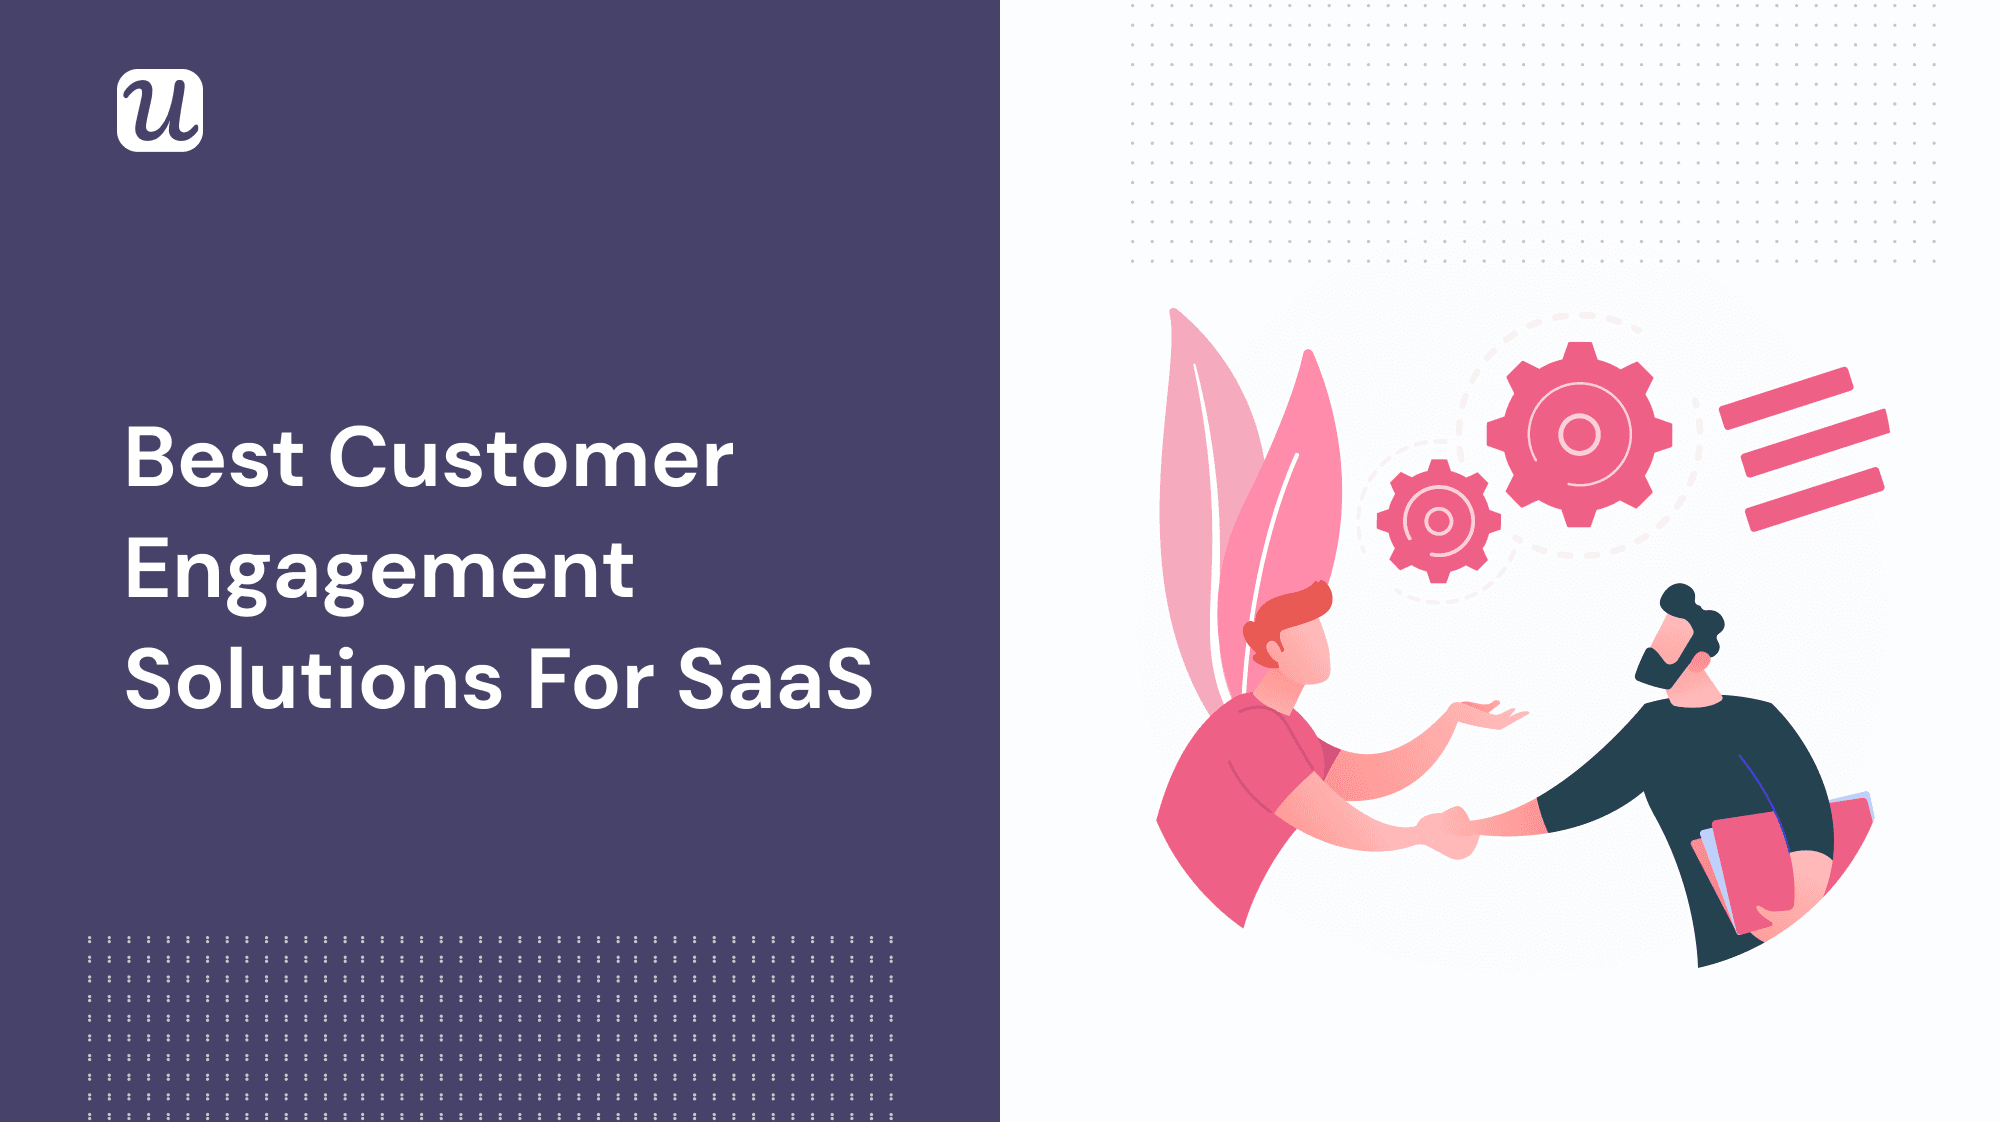 5 Customer Engagement Solutions For SaaS You Can Implement Right Away And Drive Growth